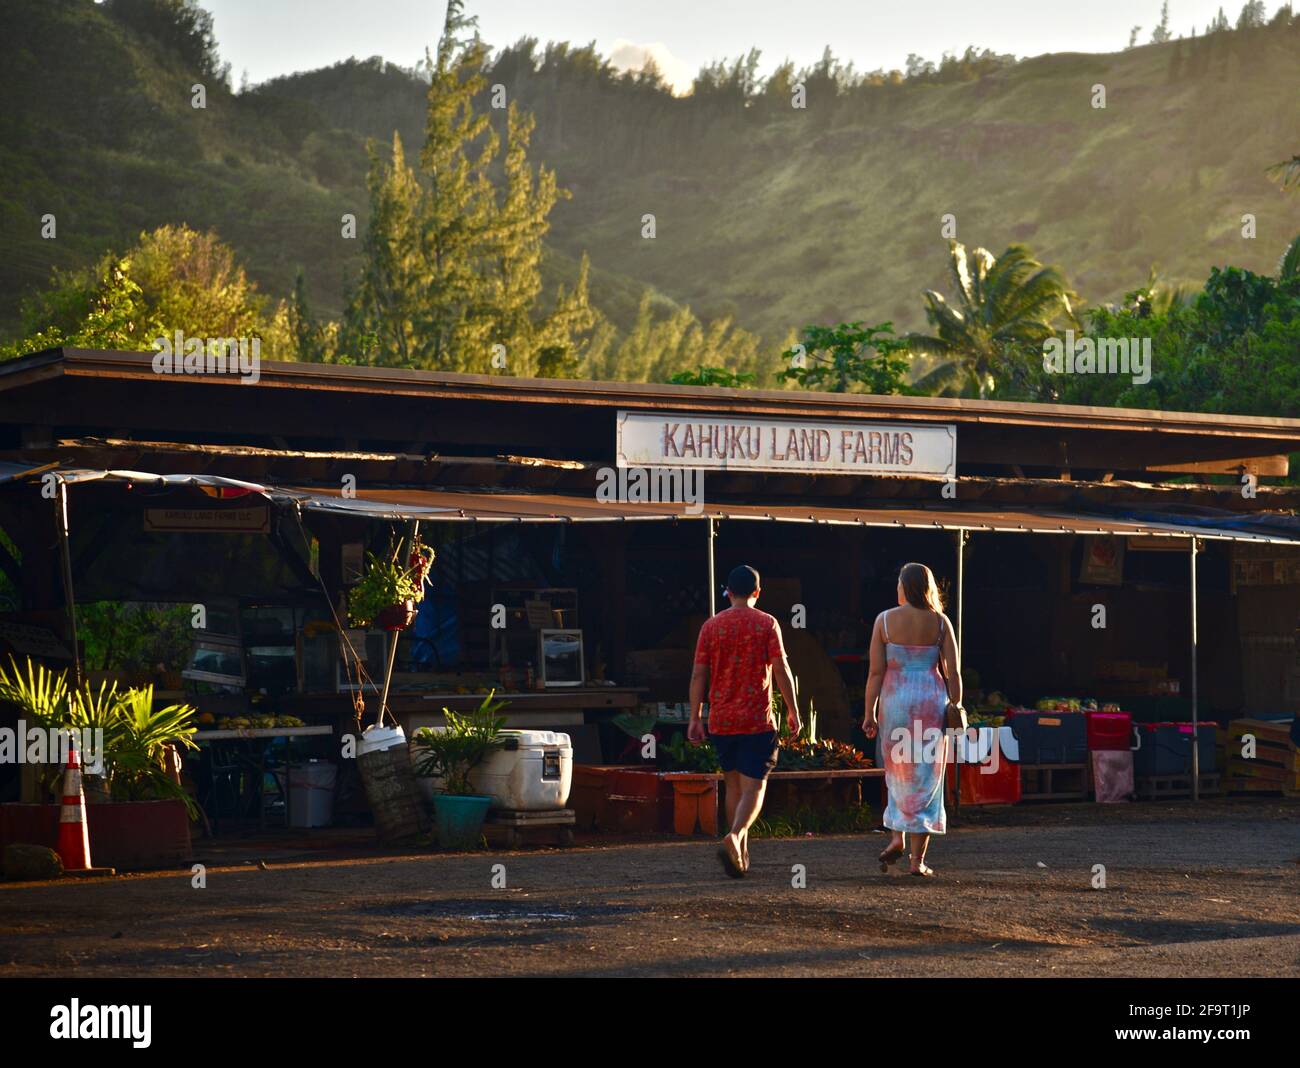 Young couple shopping during sunset at roadside farm market stand at Kahuku Land Farms, North Shore of Oahu, near Turtle Bay Resort, Hawaii, USA Stock Photo